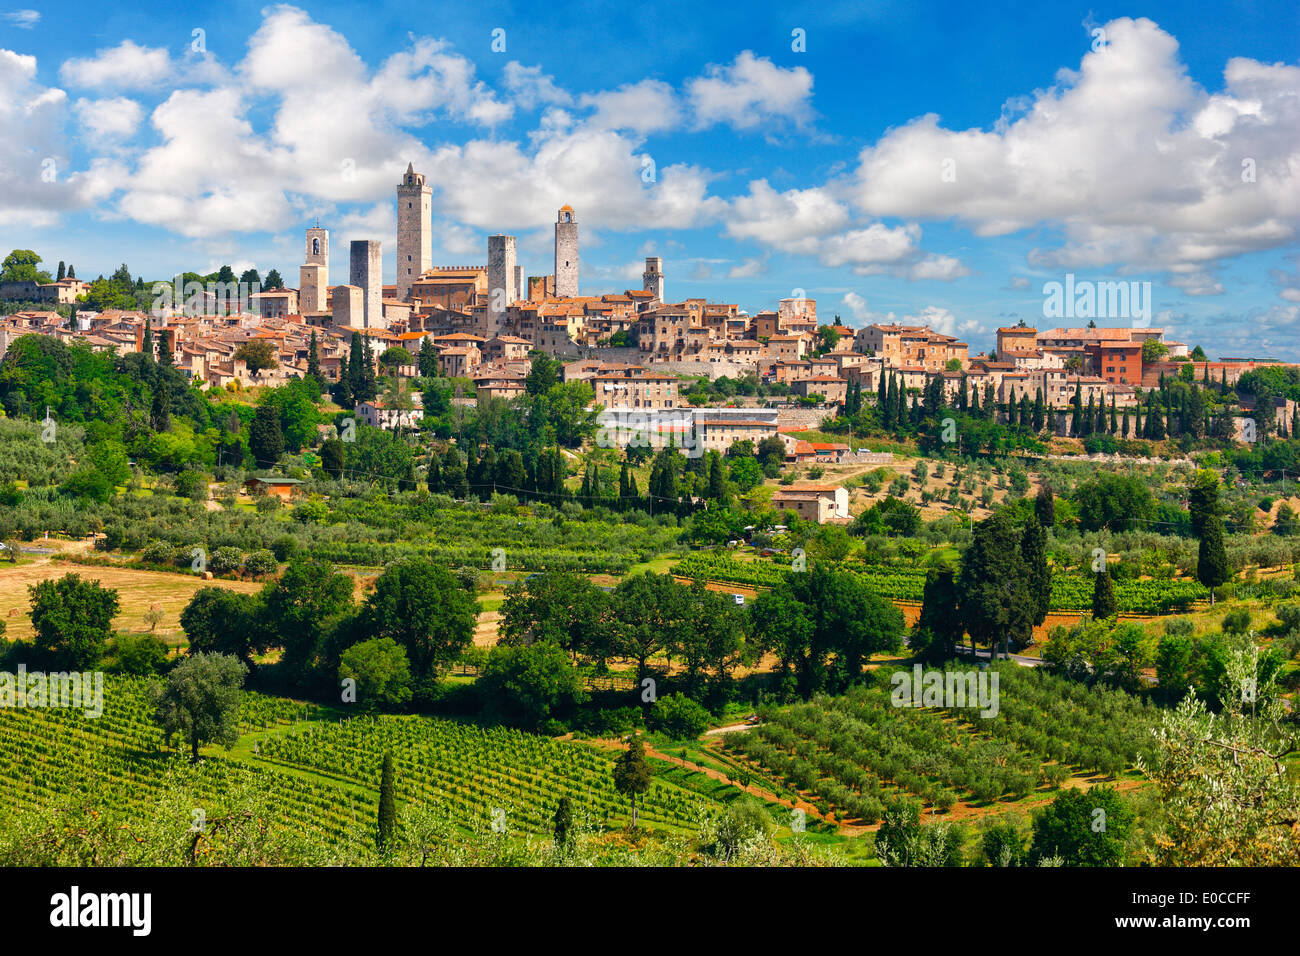 The medieval town of San Gimignano in Tuscany, Italy. A panoramic view of the hilly  town with towers and beautiful clouds. Stock Photo